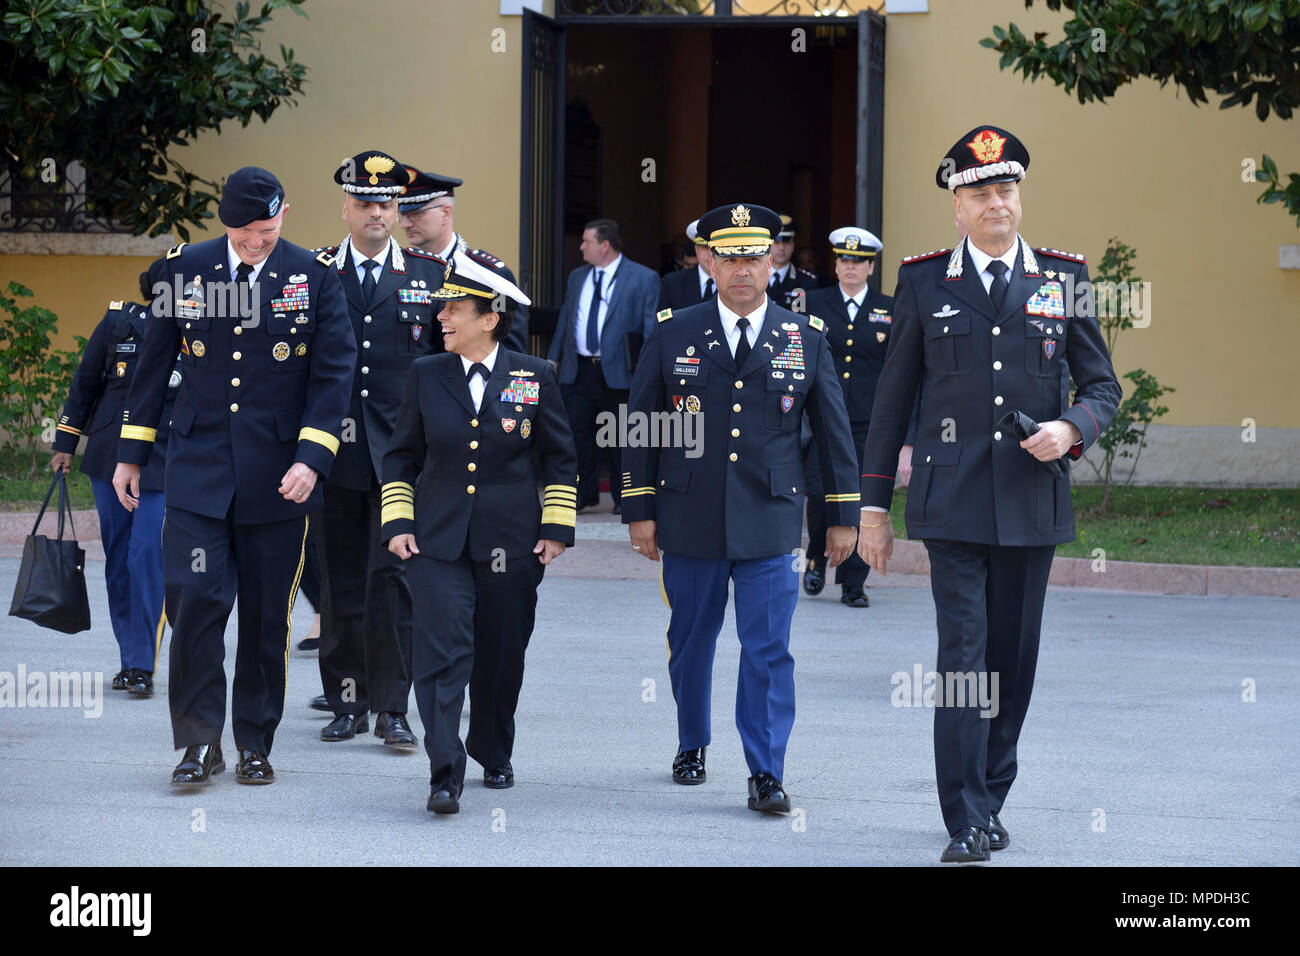 (From left) U.S. Army Africa Commanding General, Maj. Gen. Joseph P. Harrington, Admiral Michelle Howard, NATO JFC-Naples Commander, U.S. Army Col. Darius S. Gallegos, Center of Excellence for Stability Police Units (CoESPU) deputy director and Lt. Gen Vincenzo Coppola, deputy commander of the Carabinieri Corps, during the visit at the CoESPU Vicenza, April 10, 2017. Stock Photo